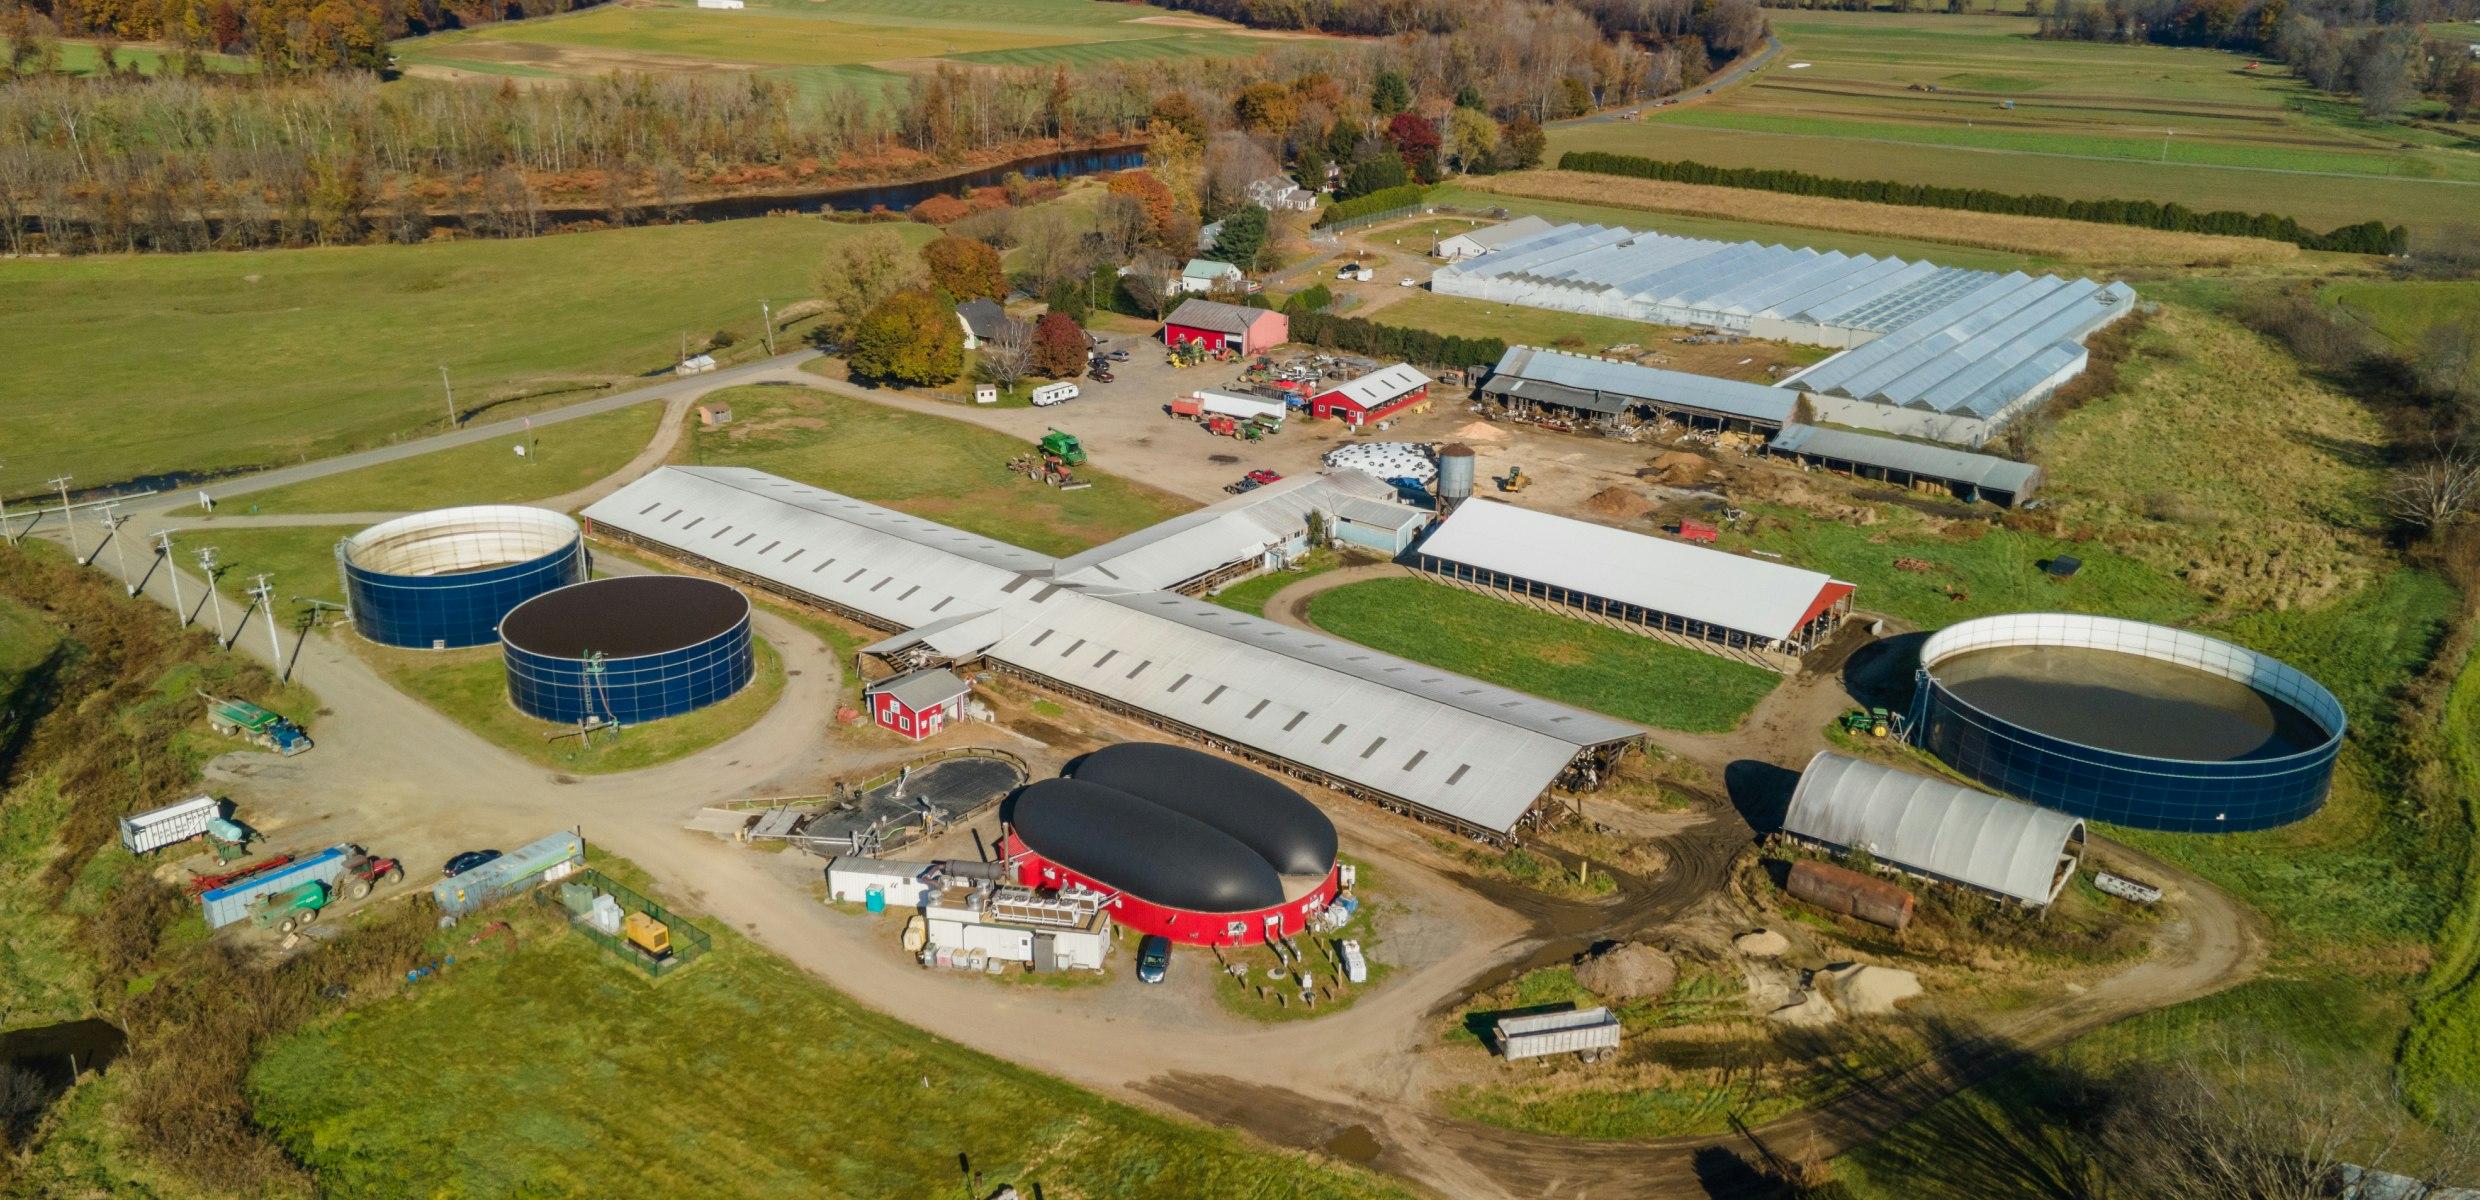 Anaerobic digestion facility on a farm, generating renewable energy from food waste recycling